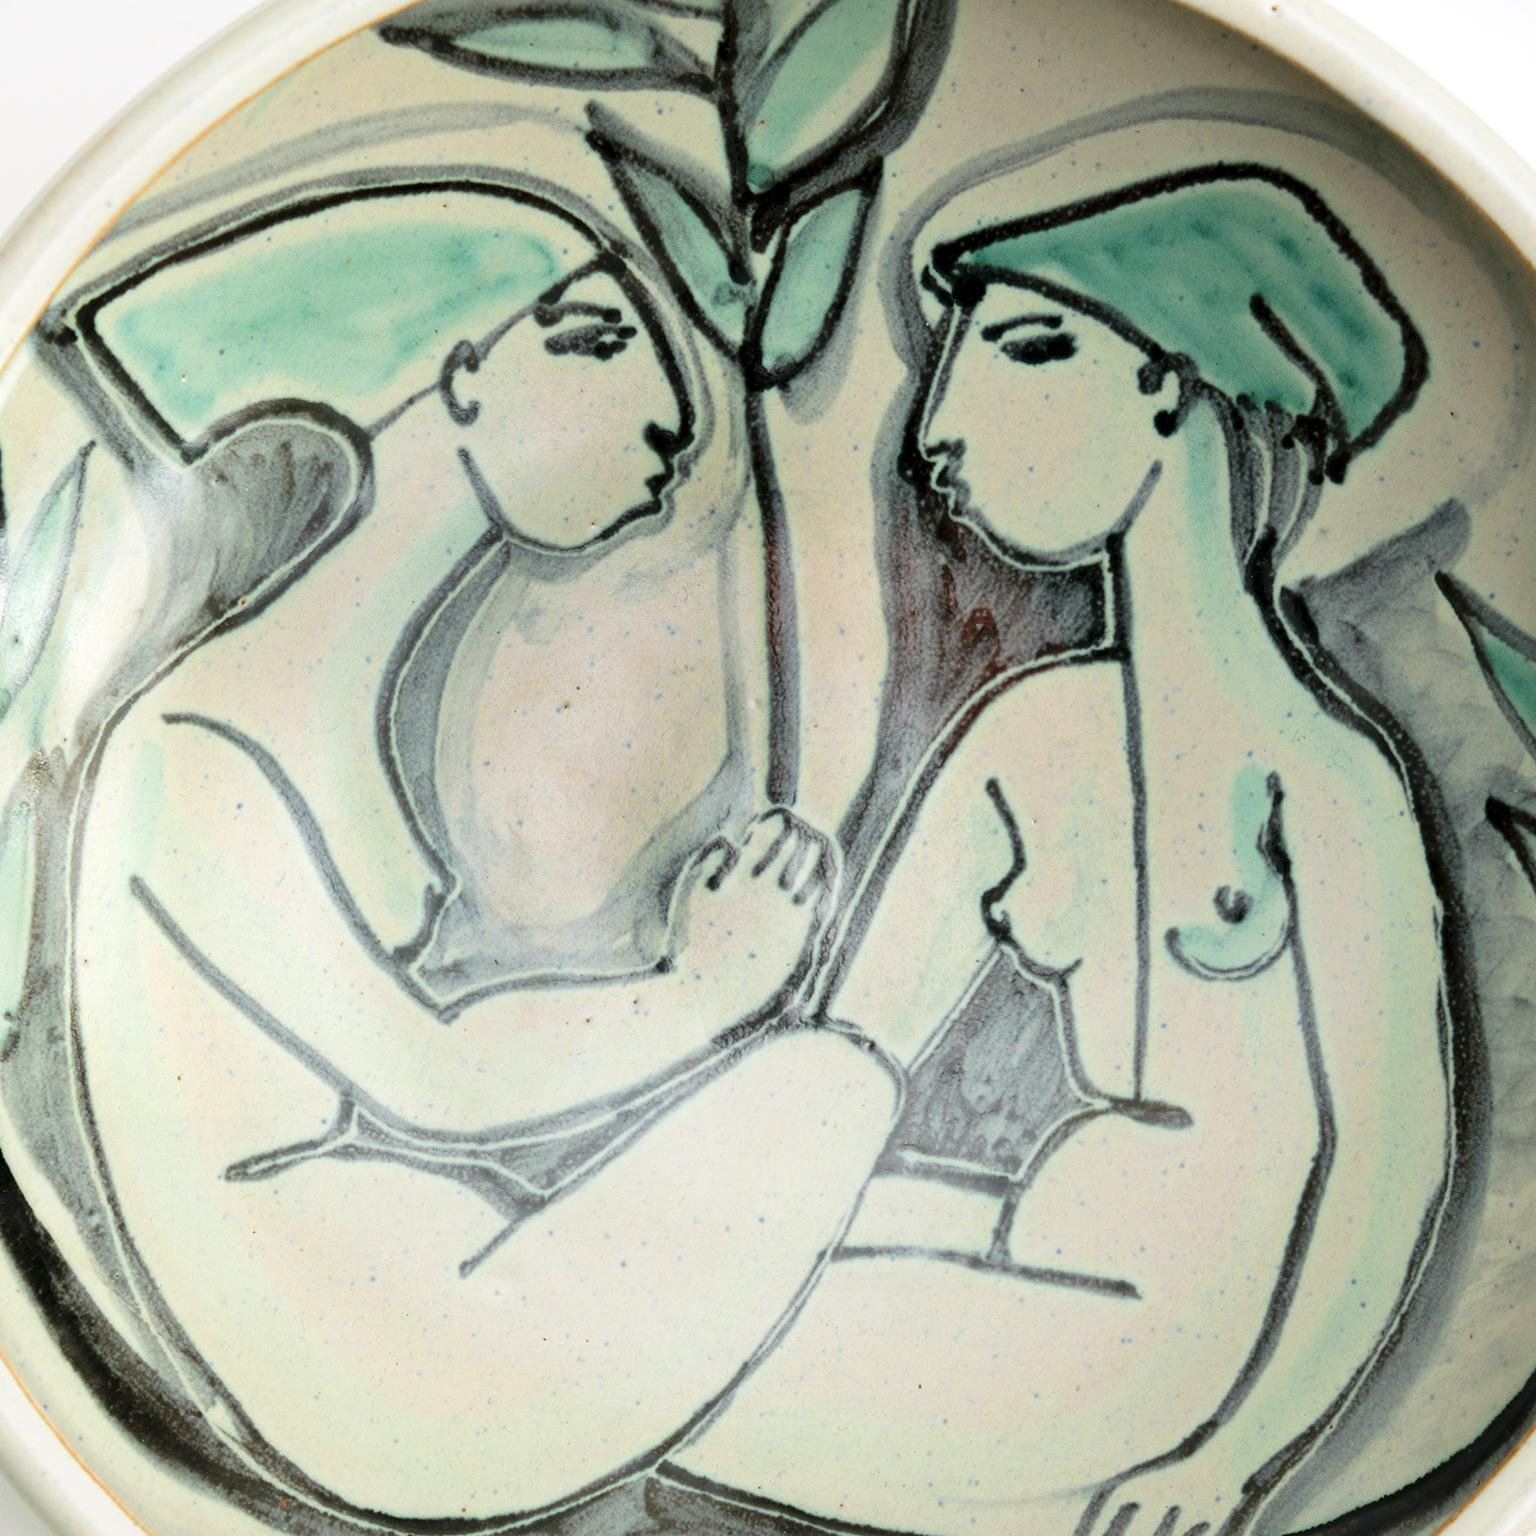 Danish Artist Mette Doller hand decorated ceramic bowl with two seated female figures with green hats. This bowl is signed by Doller on reverse along with Höganäs Keramik mark, Sweden, 1950’s.

Measures: Diameter: 11.25”, height: 3.25”.